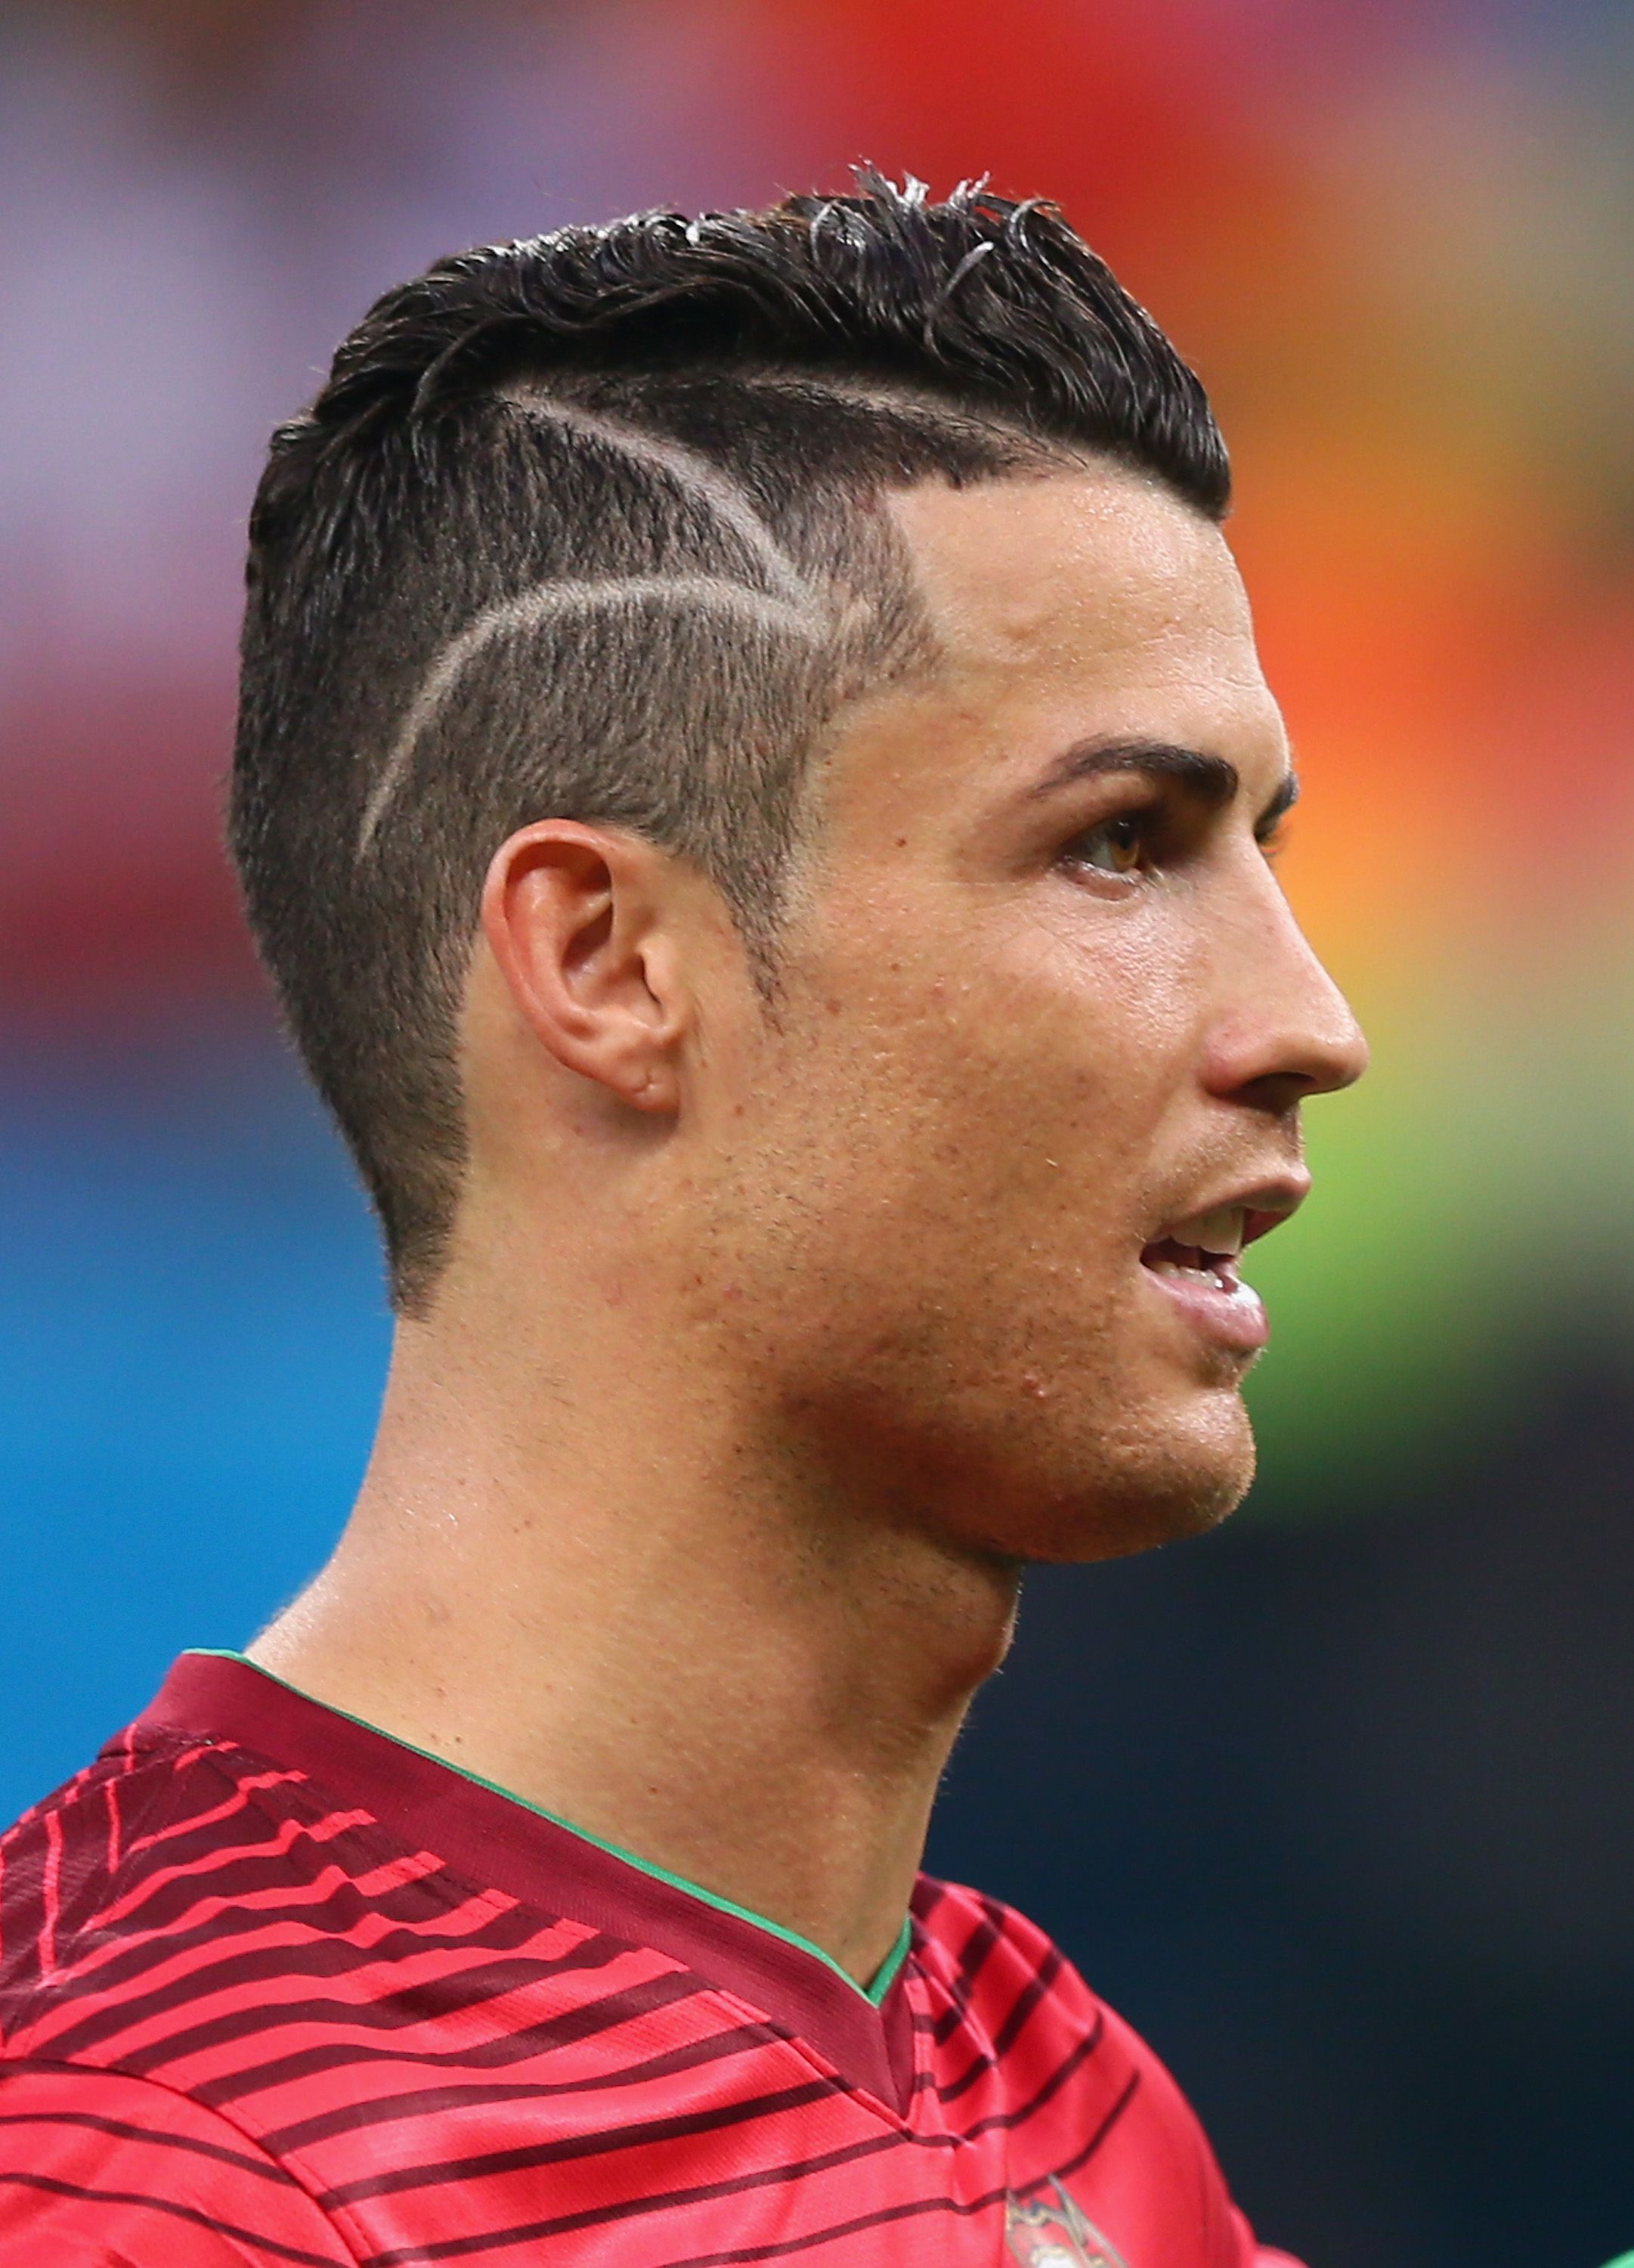 BBCtrending: Why does Cristiano Ronaldo have zigzag hair? - BBC News